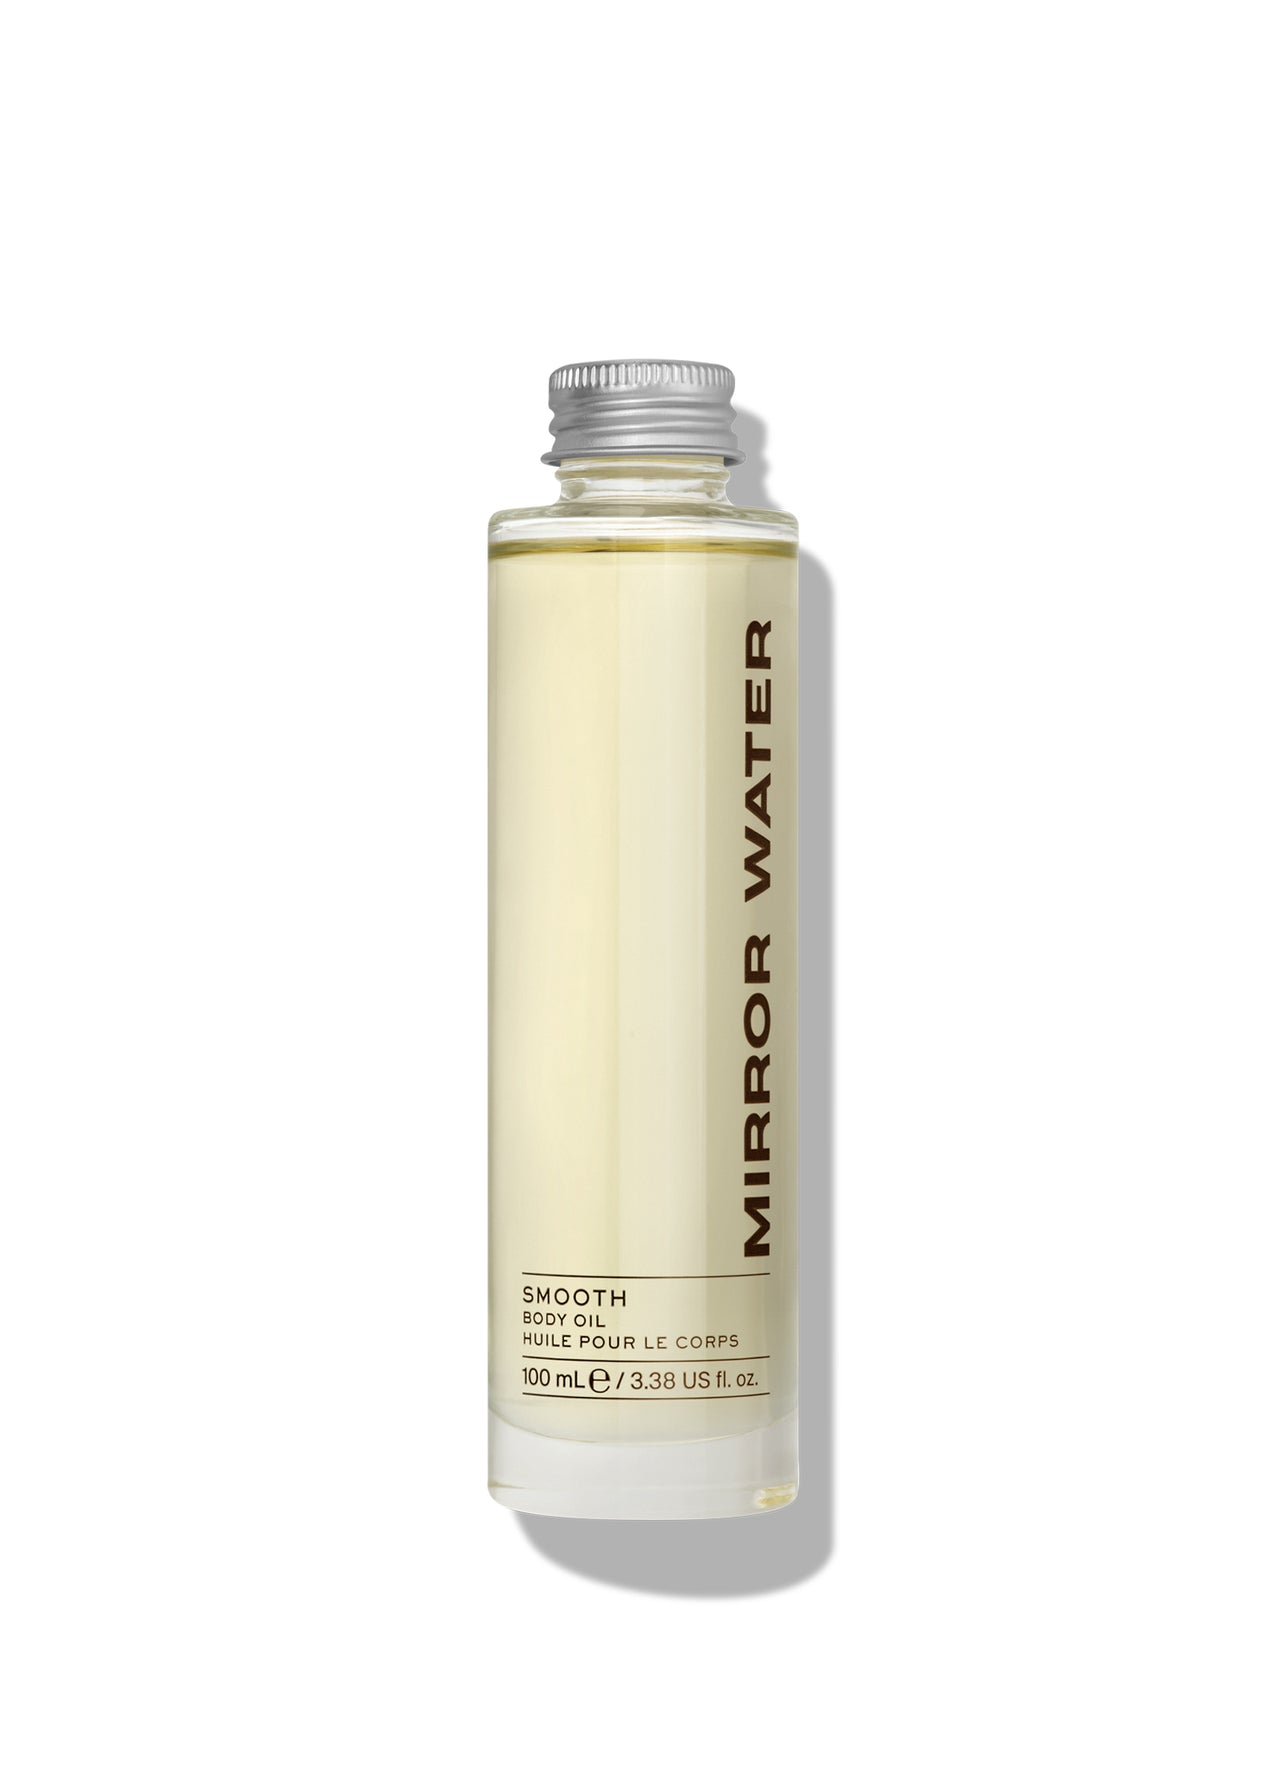 MIRROR WATER Smooth Body Oil